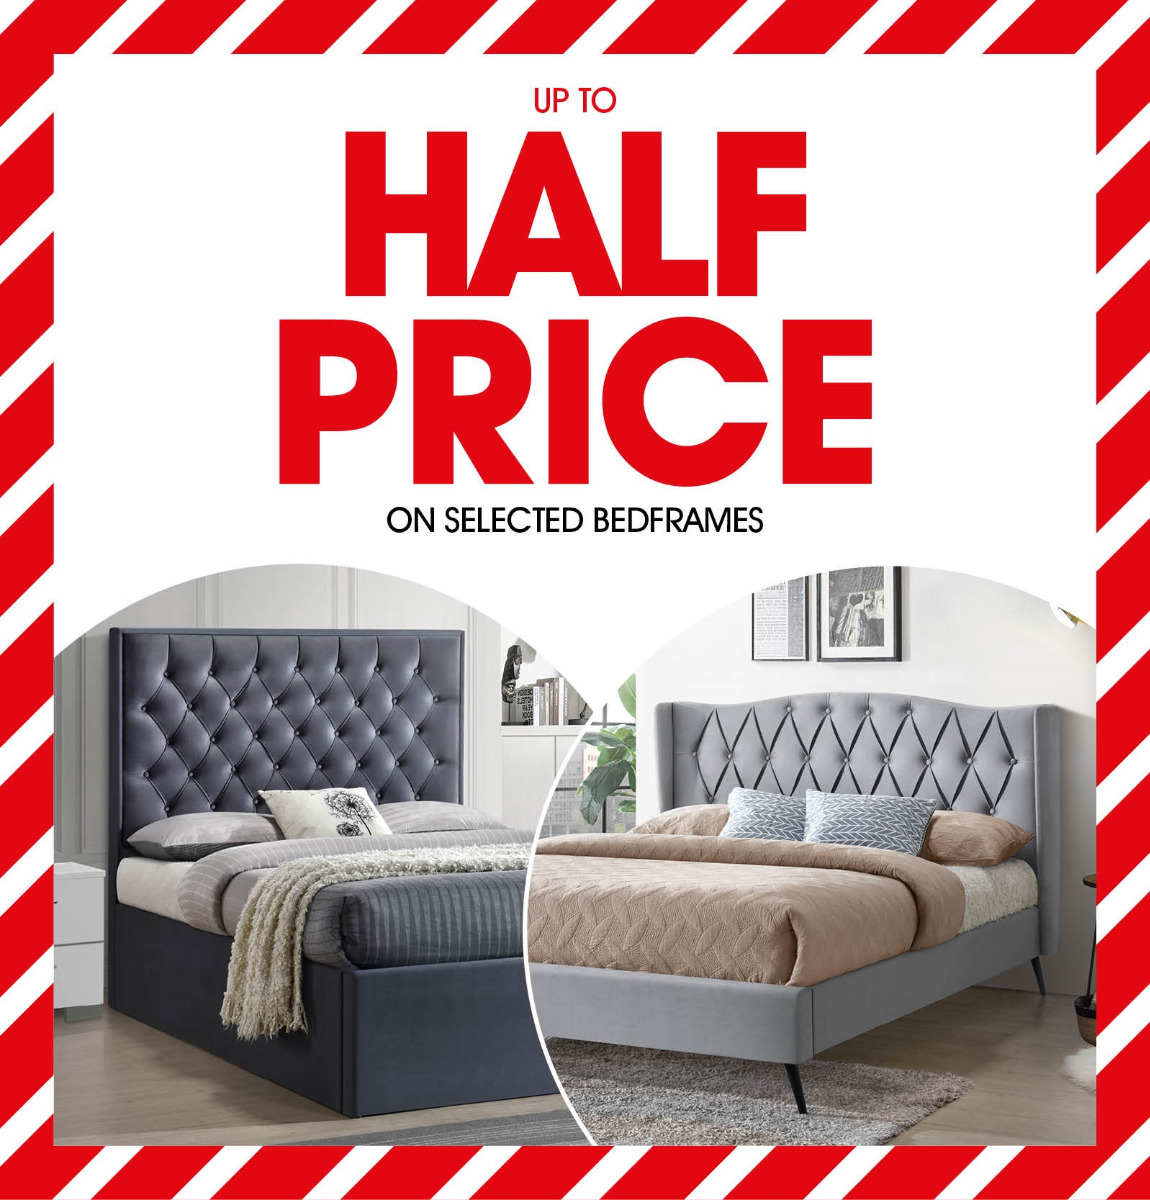 United Carpets and Beds - Half Price Bed Offer